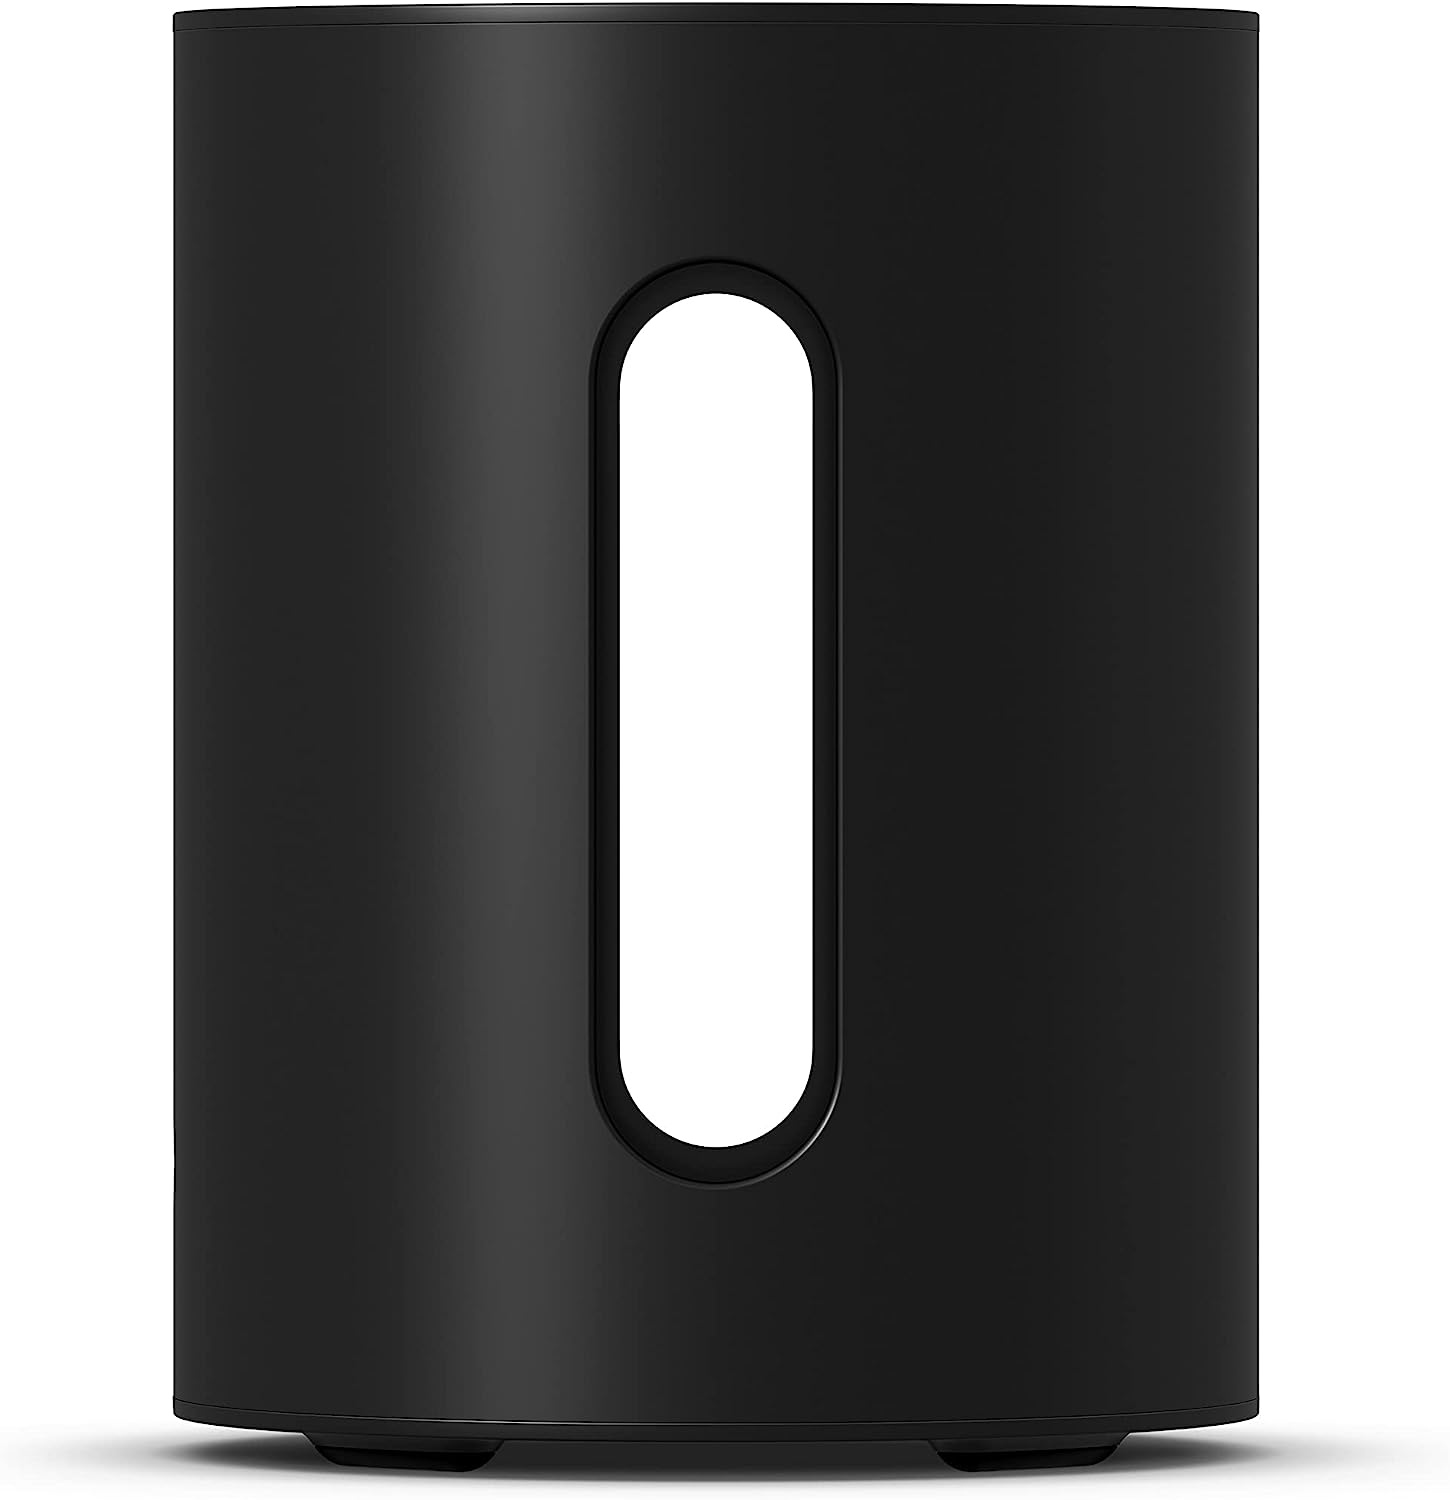 Sonos Sub Mini - Even Better Sound for TV, Music and More Thanks to Deep Bass When Connecting A Sub Mini to a Beam, Ray, One Or One Sl (Black)